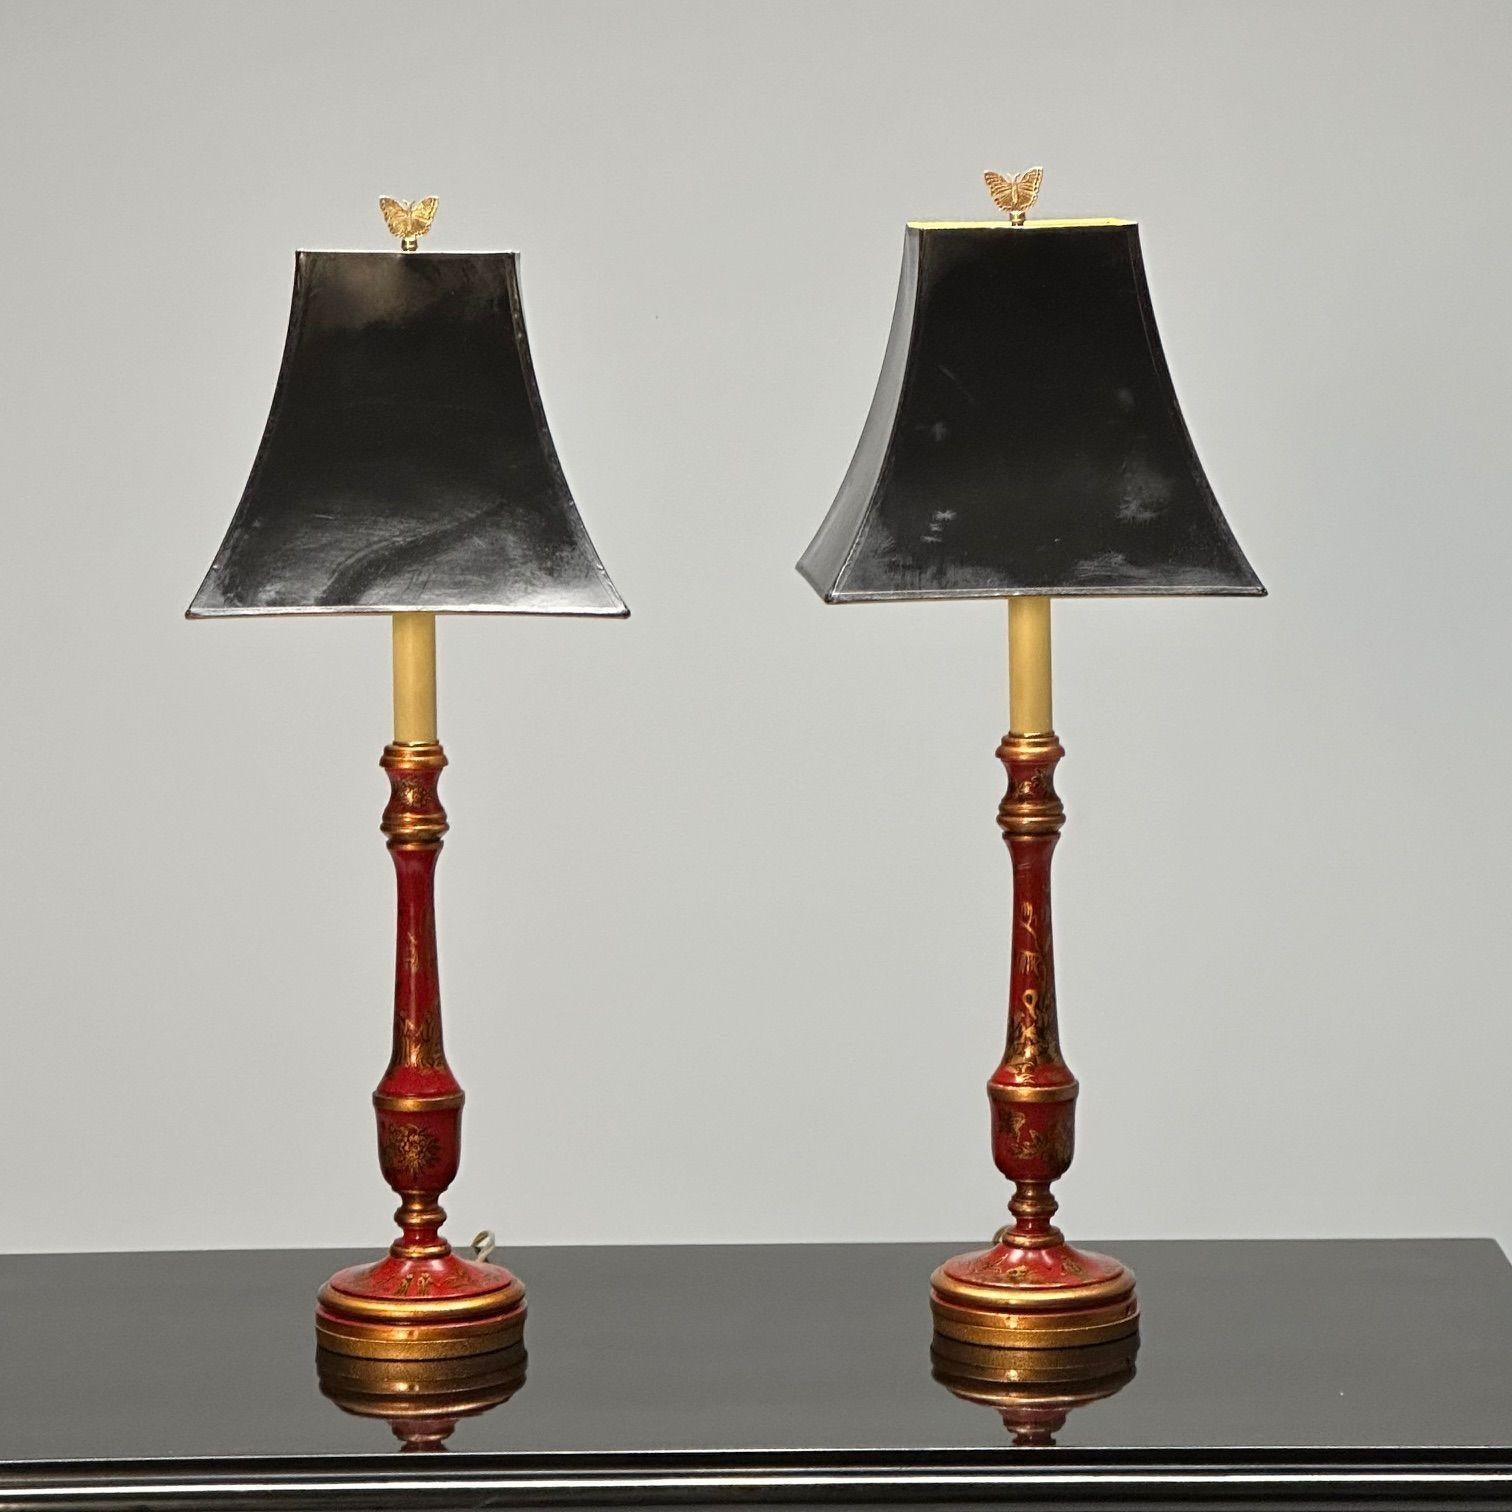 Pair of Red Chinoiserie Table / Desk Lamps, Chinese Motif, Bronze Butterfly Finial

A finely painted Jappaned pair of table prick desk lamps in fire engine red with Chinoiserie scenes. Good condition. The pair with custom shades.

Paint,